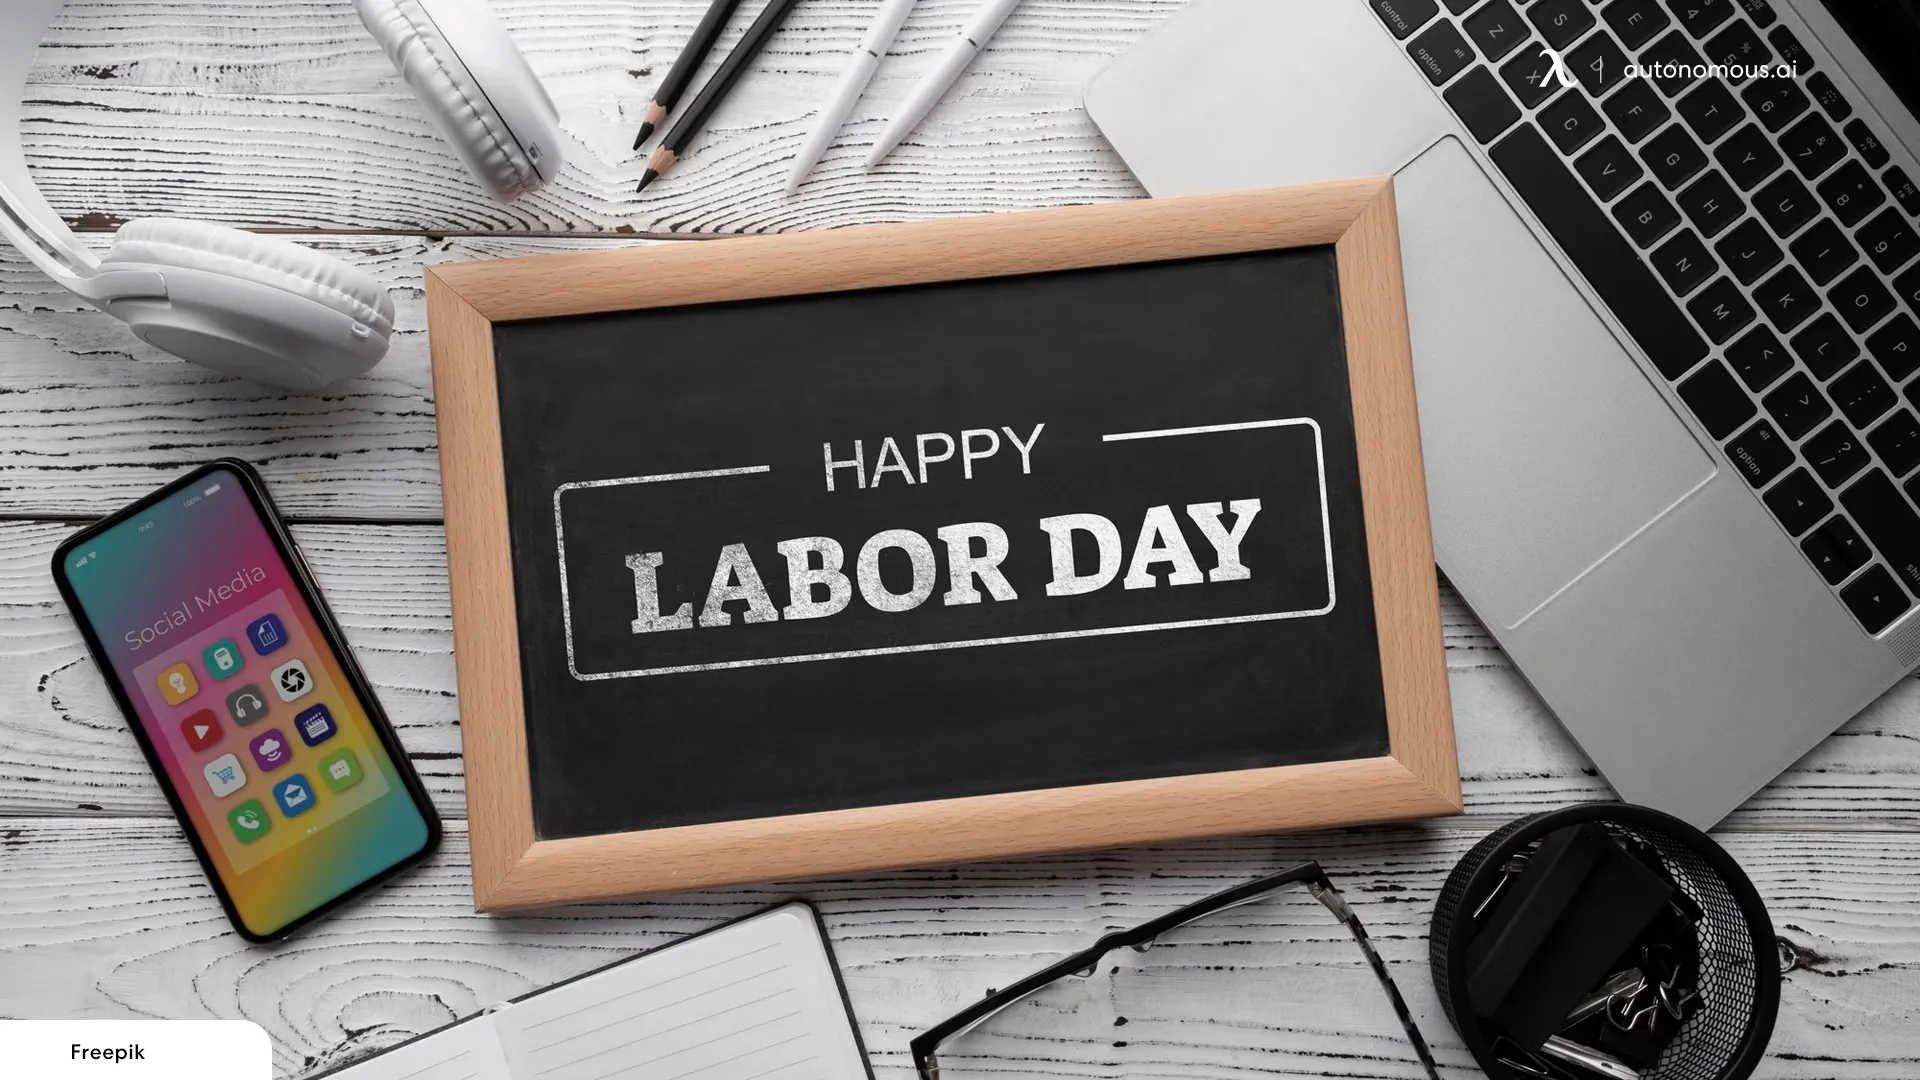 Why Shop on Labor Day?